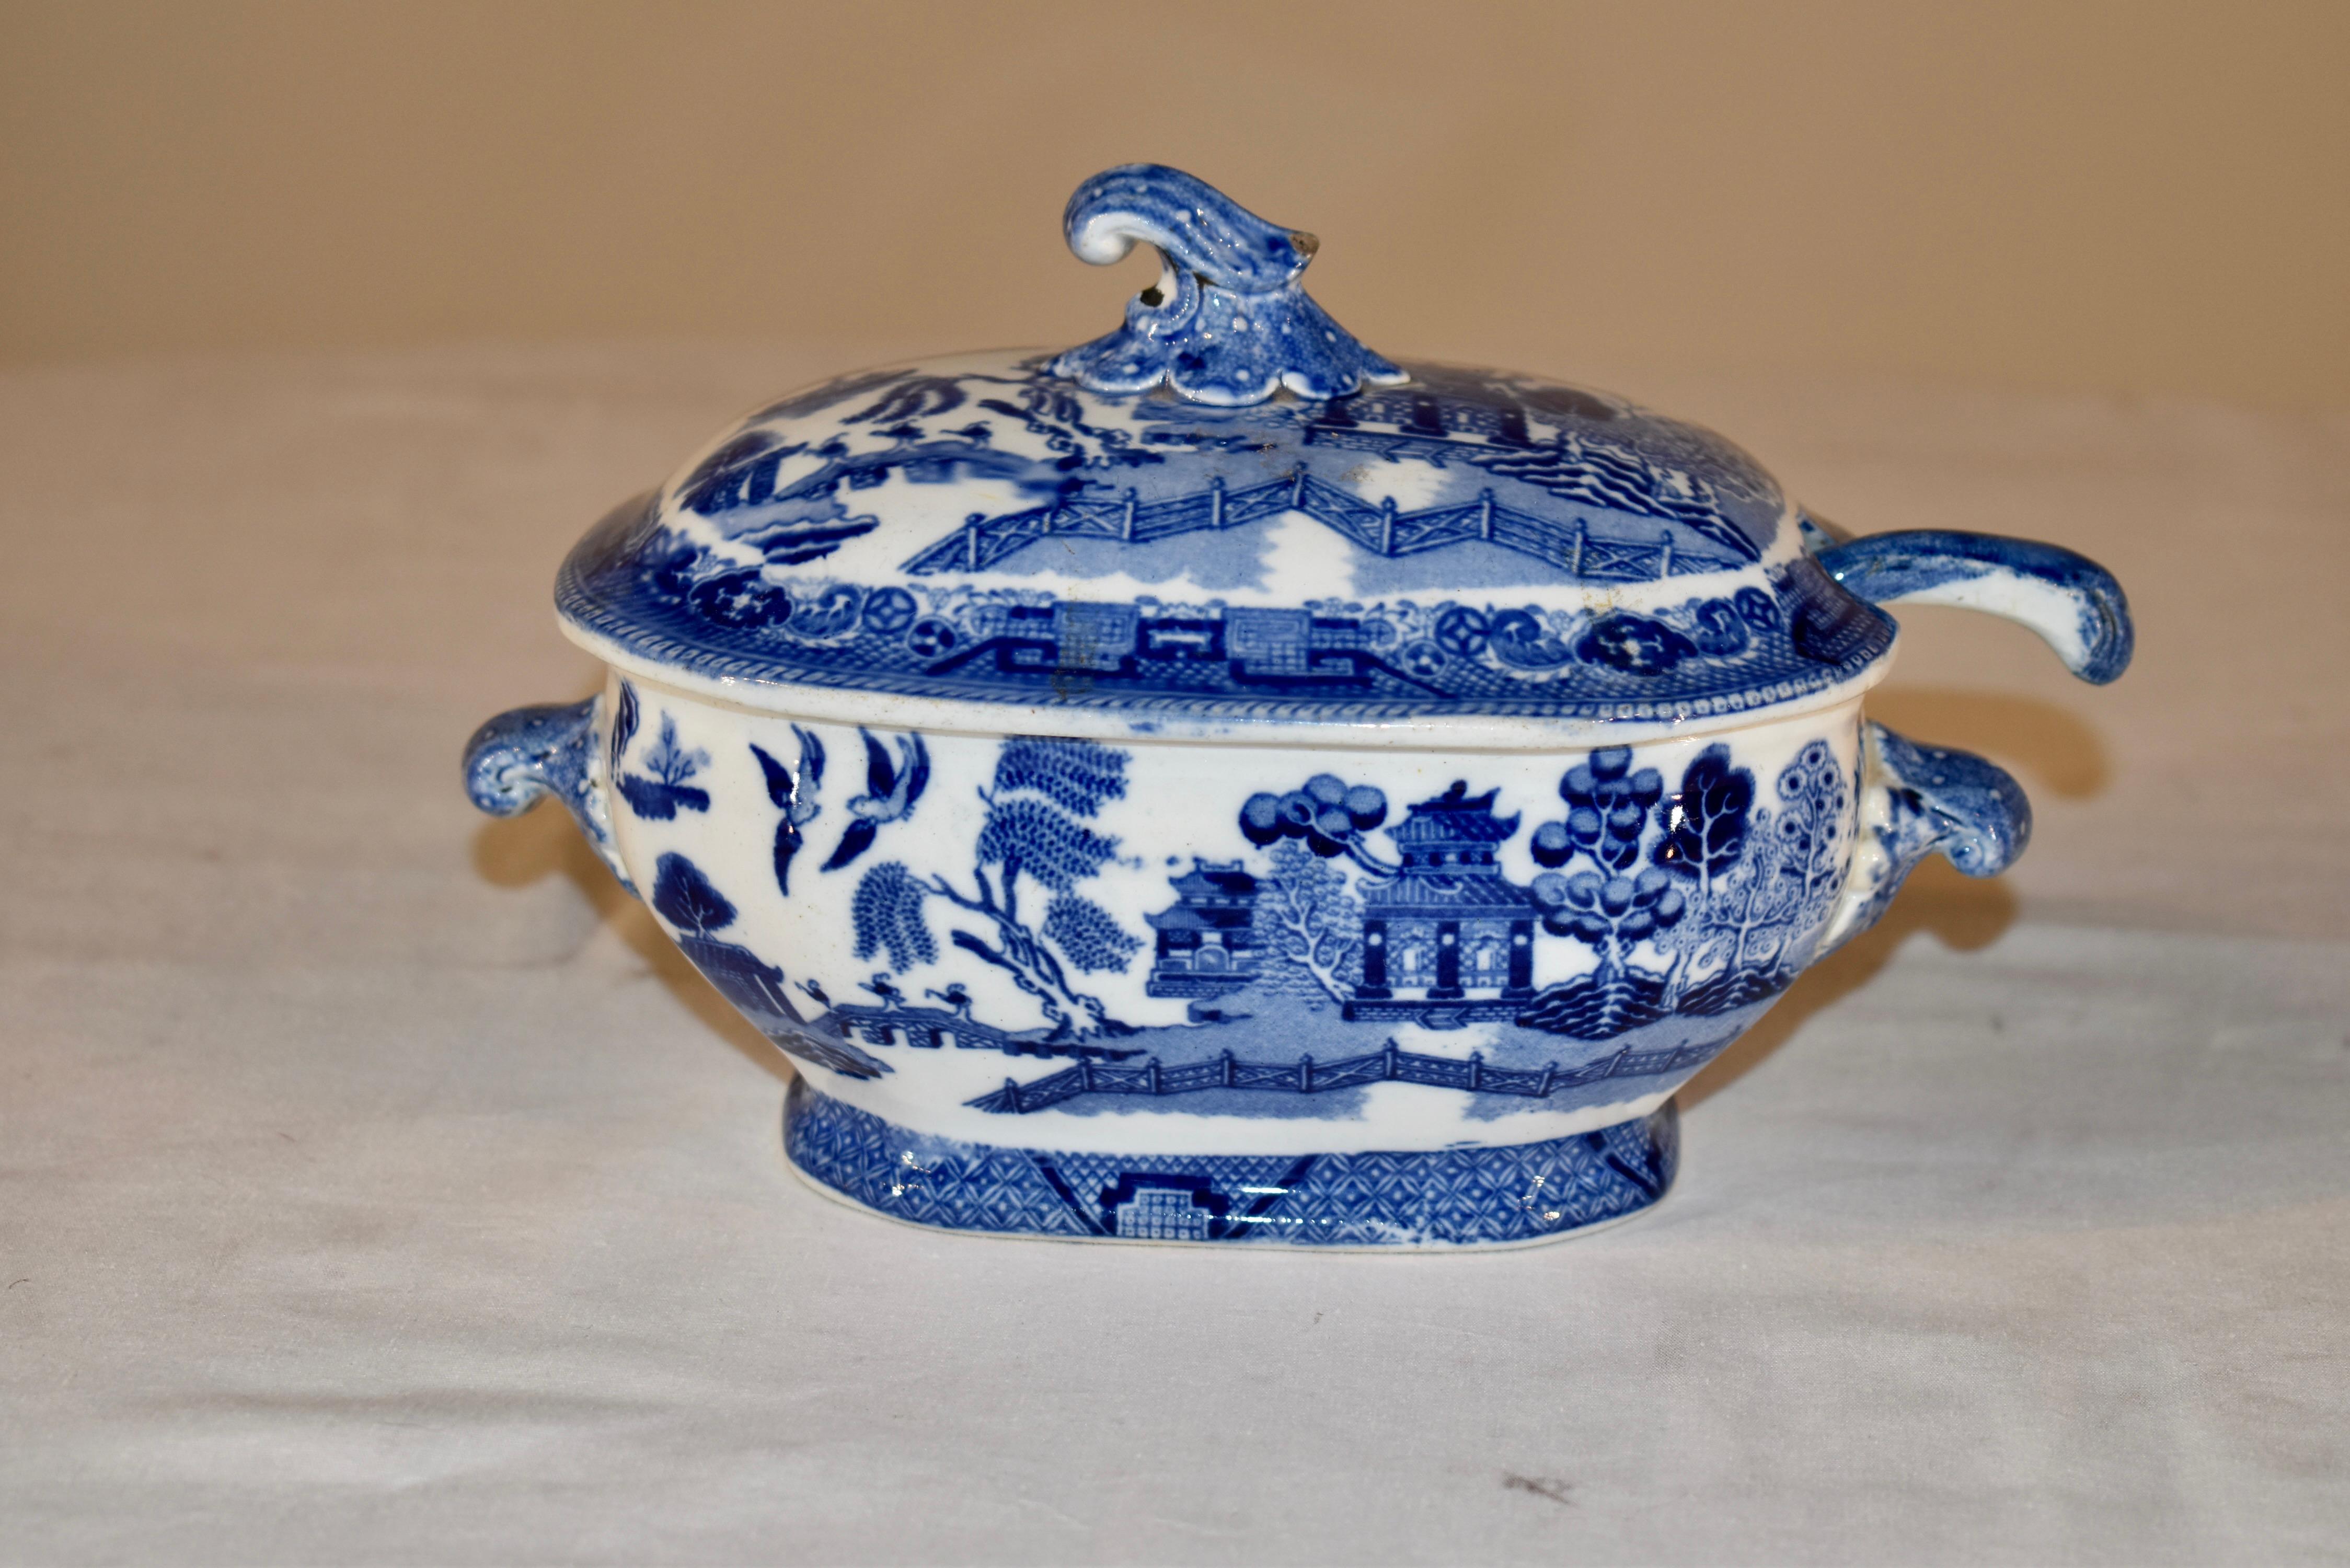 19th century Staffordshire sauce tureen and spoon from England in the highly collectible 